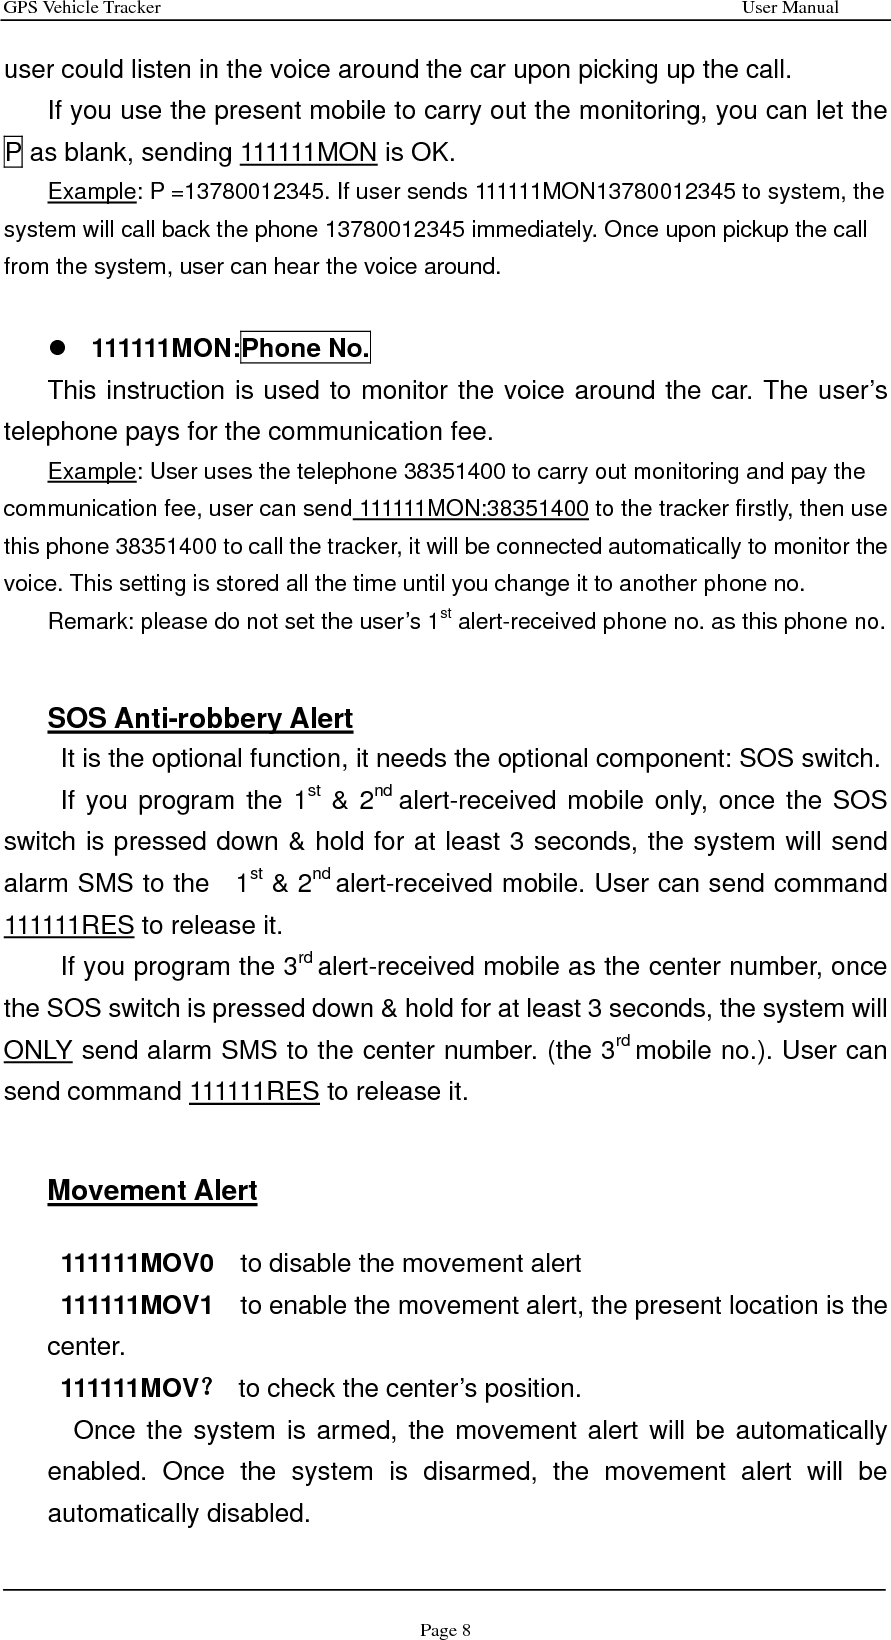 GPS Vehicle Tracker                                                              User Manual Page 8 user could listen in the voice around the car upon picking up the call. If you use the present mobile to carry out the monitoring, you can let the P as blank, sending 111111MON is OK. Example: P =13780012345. If user sends 111111MON13780012345 to system, the system will call back the phone 13780012345 immediately. Once upon pickup the call from the system, user can hear the voice around.  z 111111MON:Phone No. This instruction is used to monitor the voice around the car. The user’s telephone pays for the communication fee. Example: User uses the telephone 38351400 to carry out monitoring and pay the communication fee, user can send 111111MON:38351400 to the tracker firstly, then use this phone 38351400 to call the tracker, it will be connected automatically to monitor the voice. This setting is stored all the time until you change it to another phone no. Remark: please do not set the user’s 1st alert-received phone no. as this phone no.   SOS Anti-robbery Alert It is the optional function, it needs the optional component: SOS switch. If you program the 1st &amp; 2nd alert-received mobile only, once the SOS switch is pressed down &amp; hold for at least 3 seconds, the system will send alarm SMS to the    1st &amp; 2nd alert-received mobile. User can send command 111111RES to release it. If you program the 3rd alert-received mobile as the center number, once the SOS switch is pressed down &amp; hold for at least 3 seconds, the system will ONLY send alarm SMS to the center number. (the 3rd mobile no.). User can send command 111111RES to release it.   Movement Alert   111111MOV0    to disable the movement alert  111111MOV1    to enable the movement alert, the present location is the center. 111111MOV？  to check the center’s position.     Once the system is armed, the movement alert will be automatically enabled. Once the system is disarmed, the movement alert will be automatically disabled. 